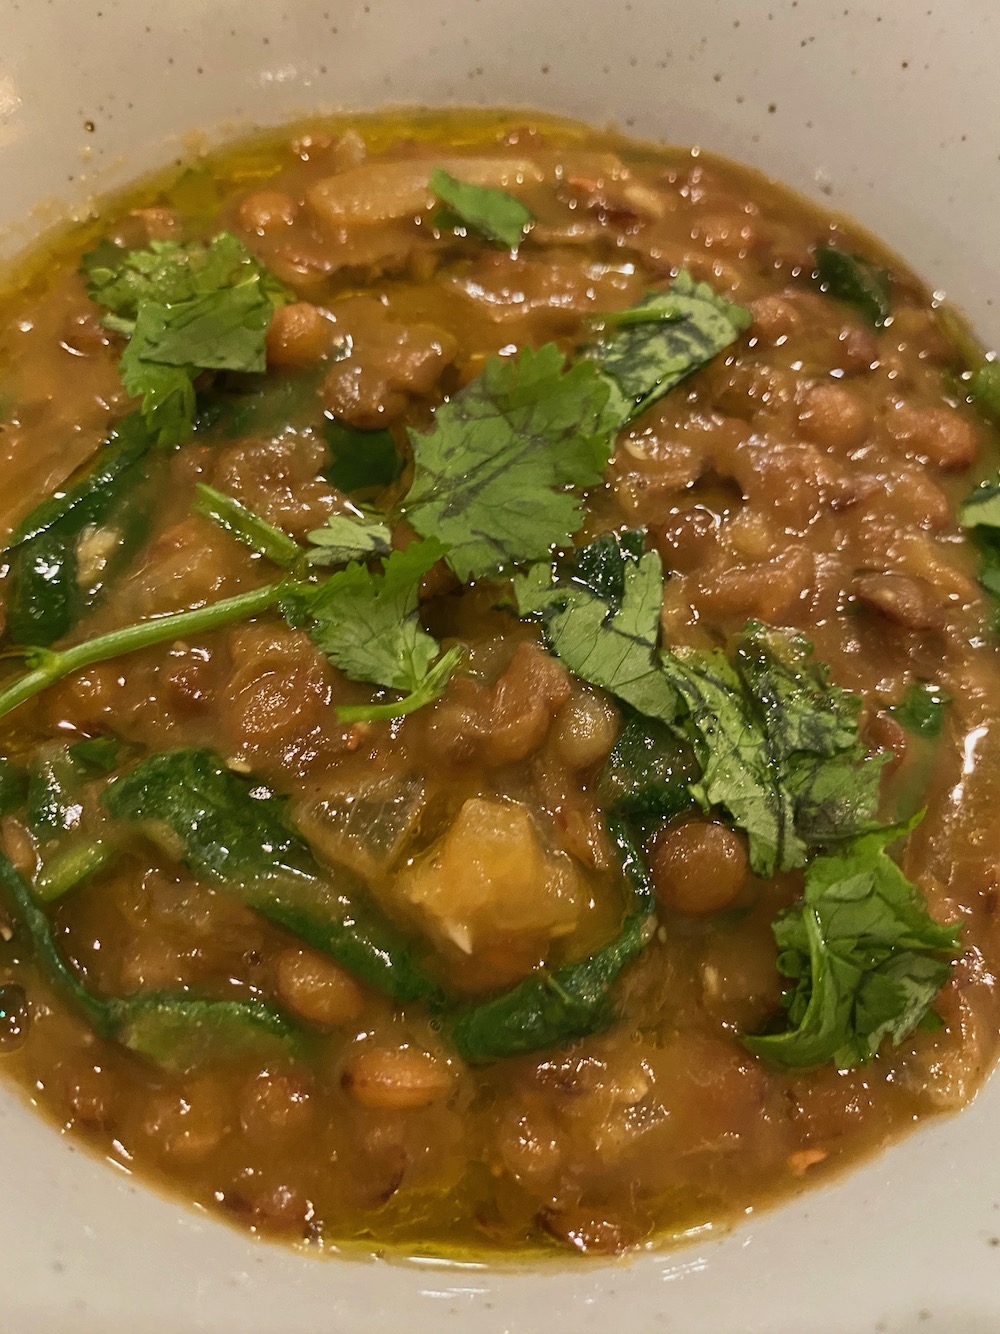 Hearty spinach lentil stew is ready!